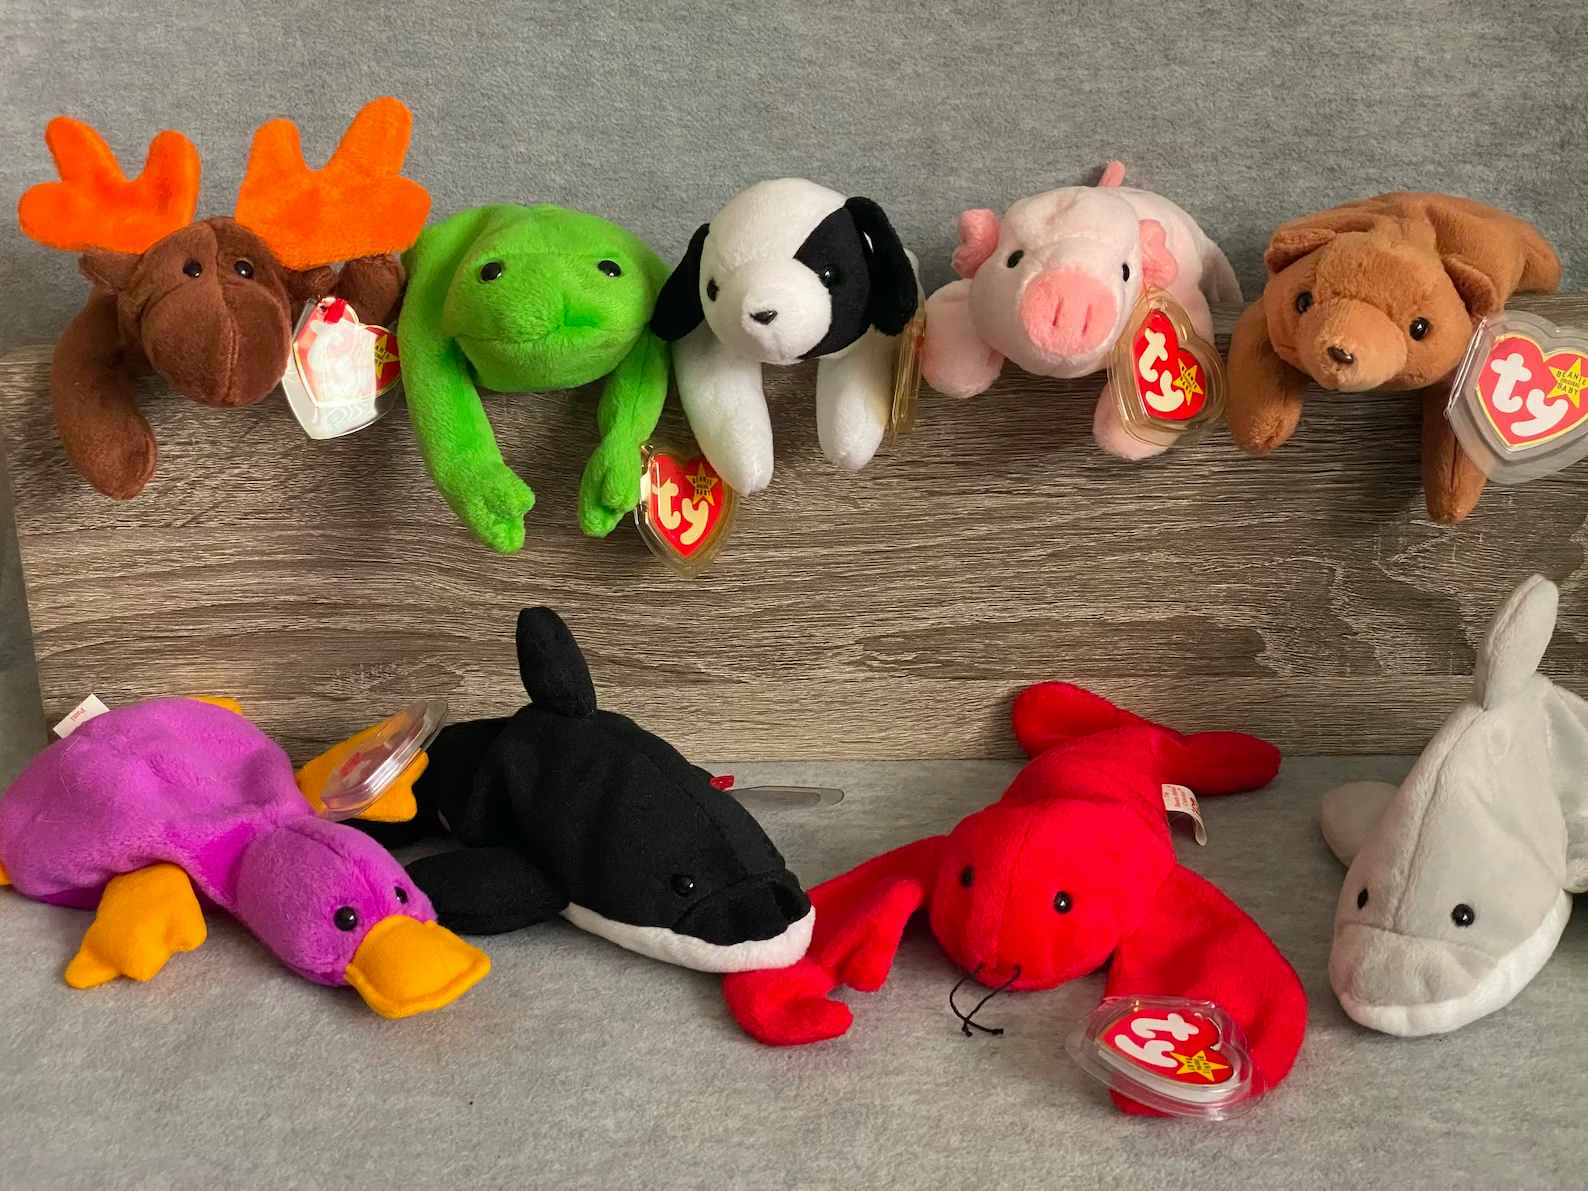 The Original 9 Beanie Babies sitting together on a display.